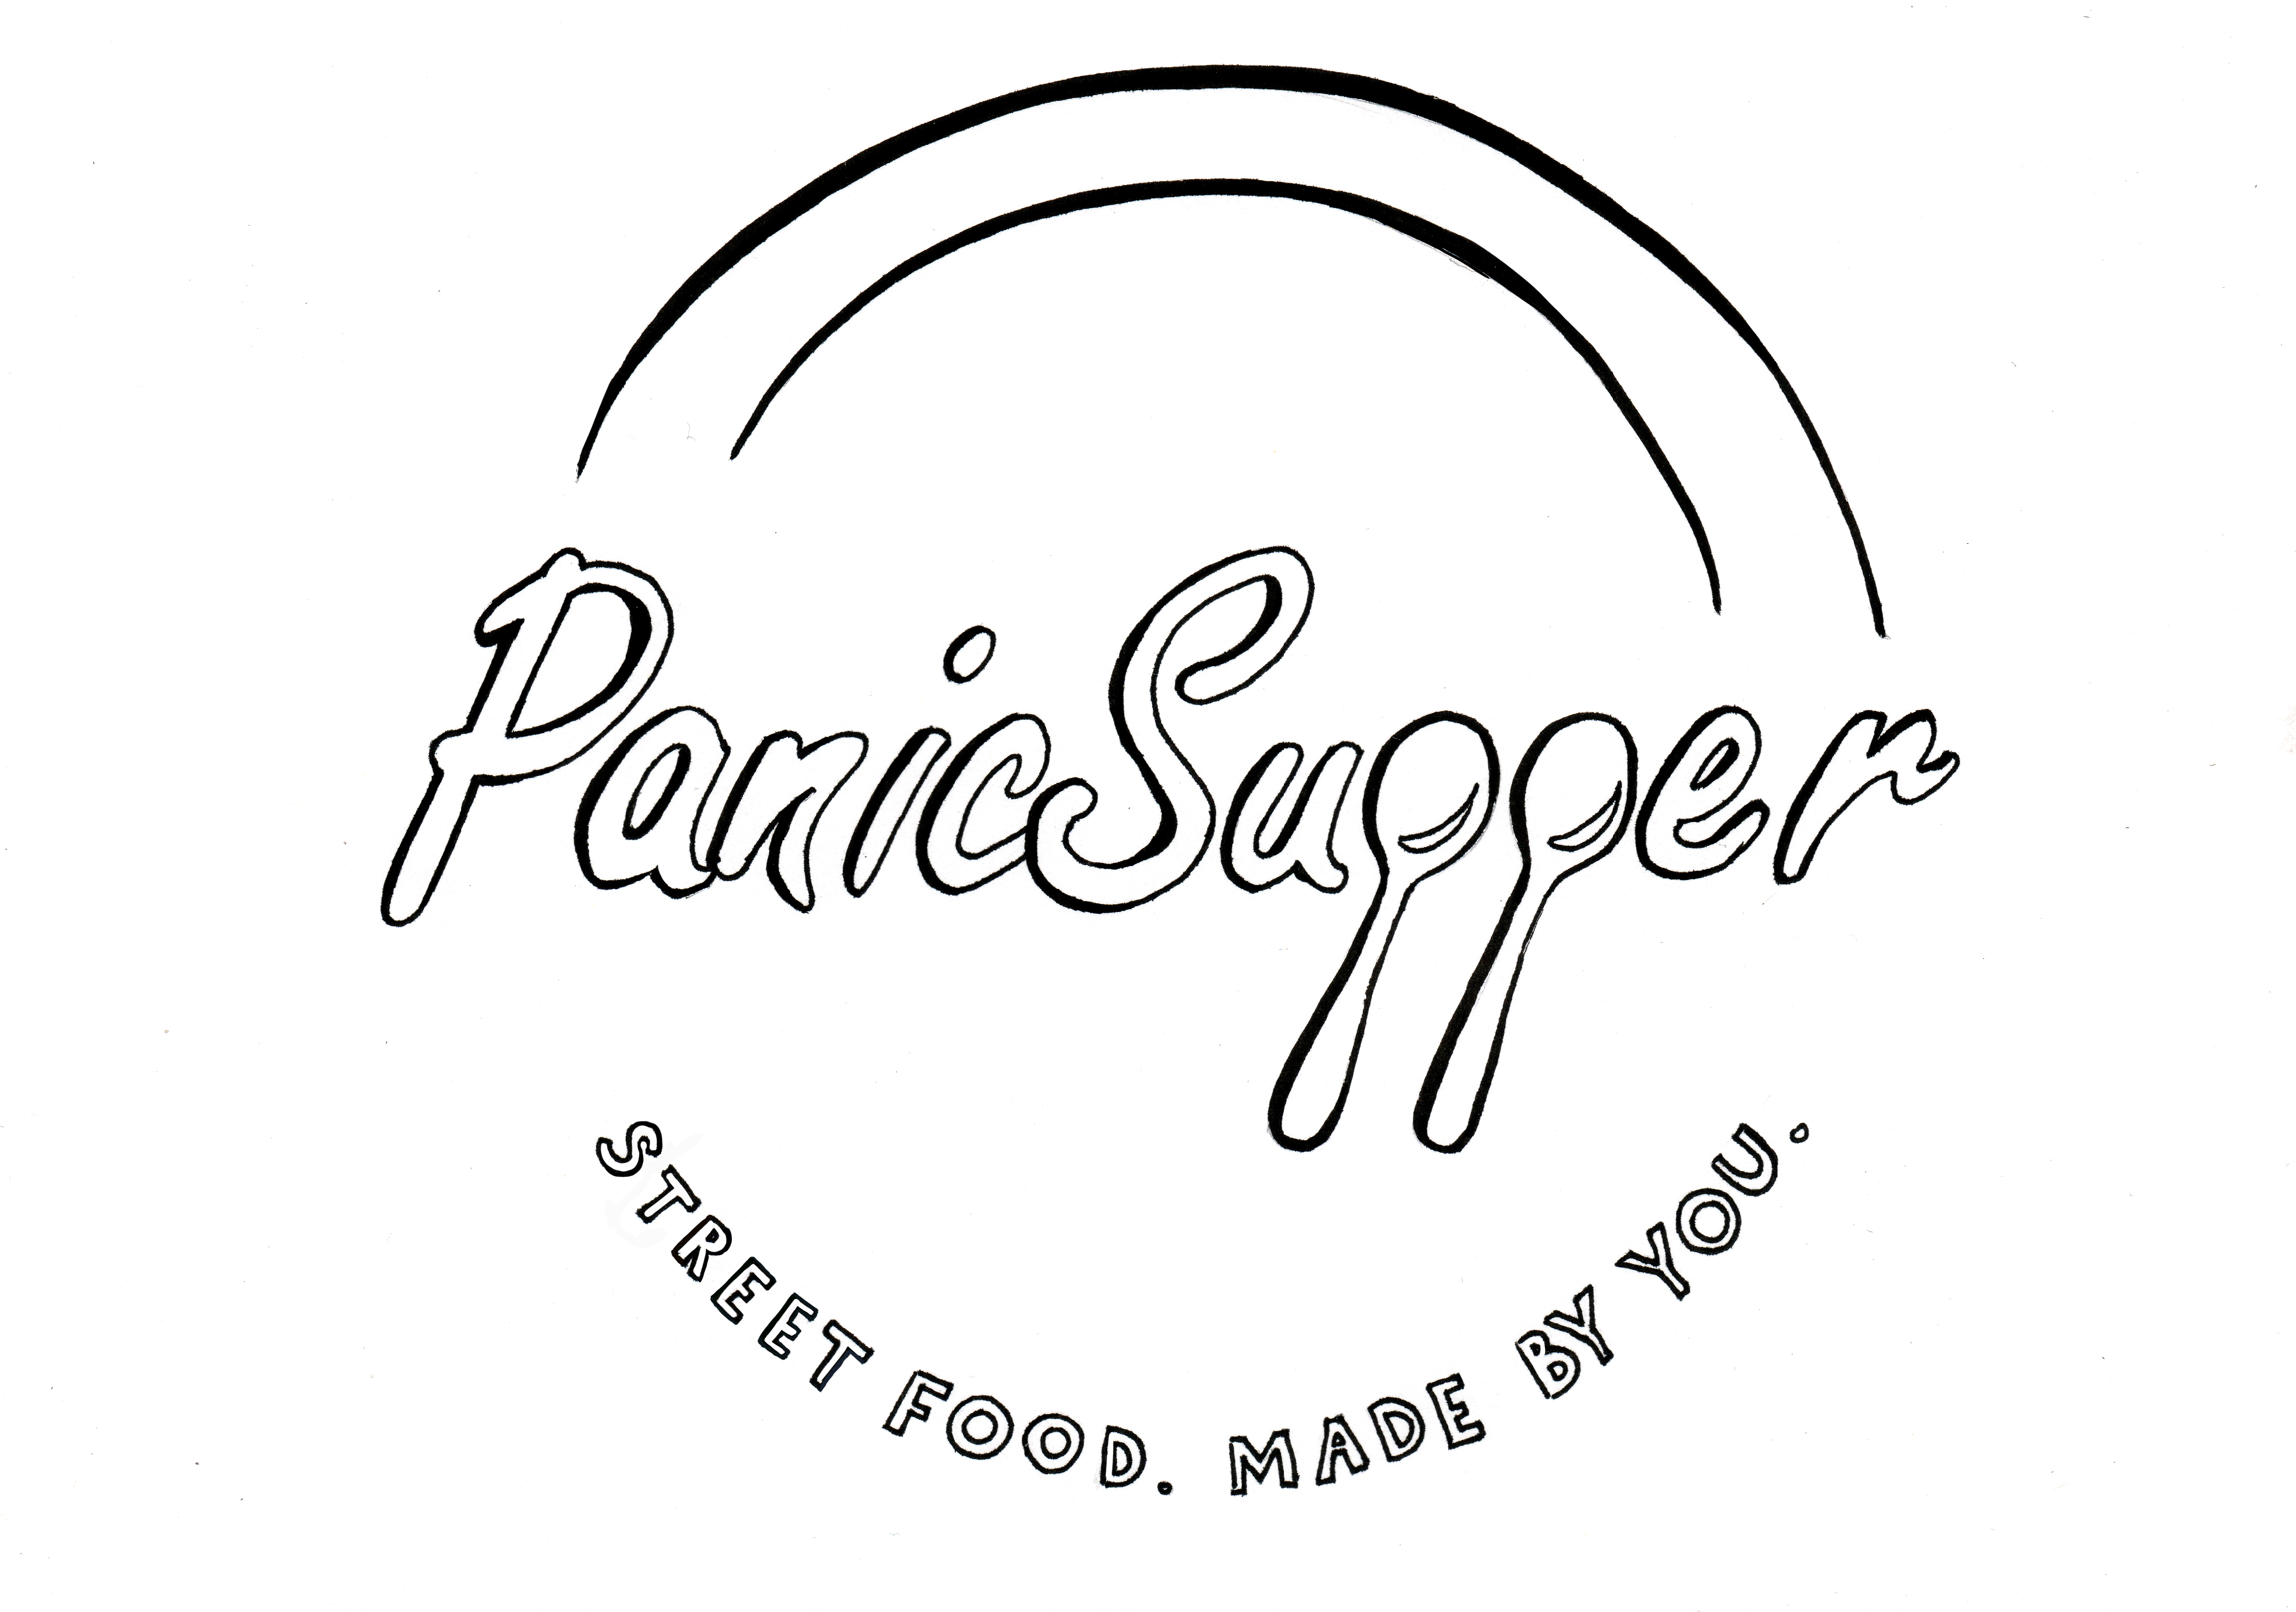 PanicSupper STREET FOOD, MADE BY YOU.